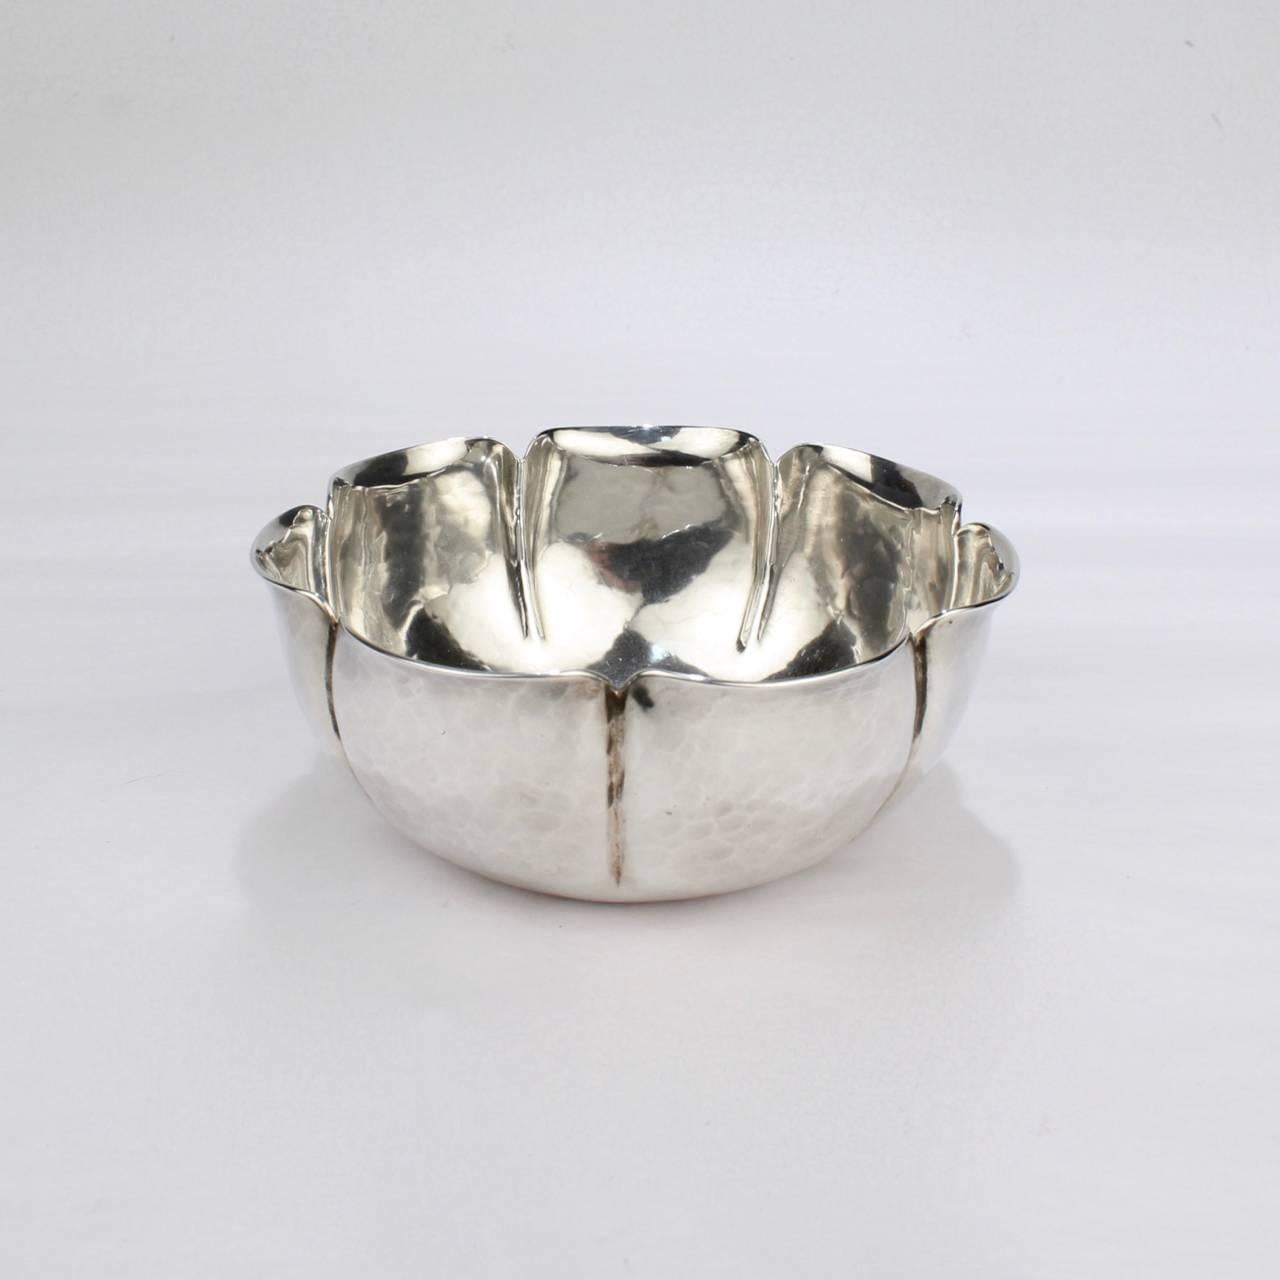 Arts and Crafts Joel F Hewes American Arts & Crafts Hand-Hammered Sterling Silver Bowl